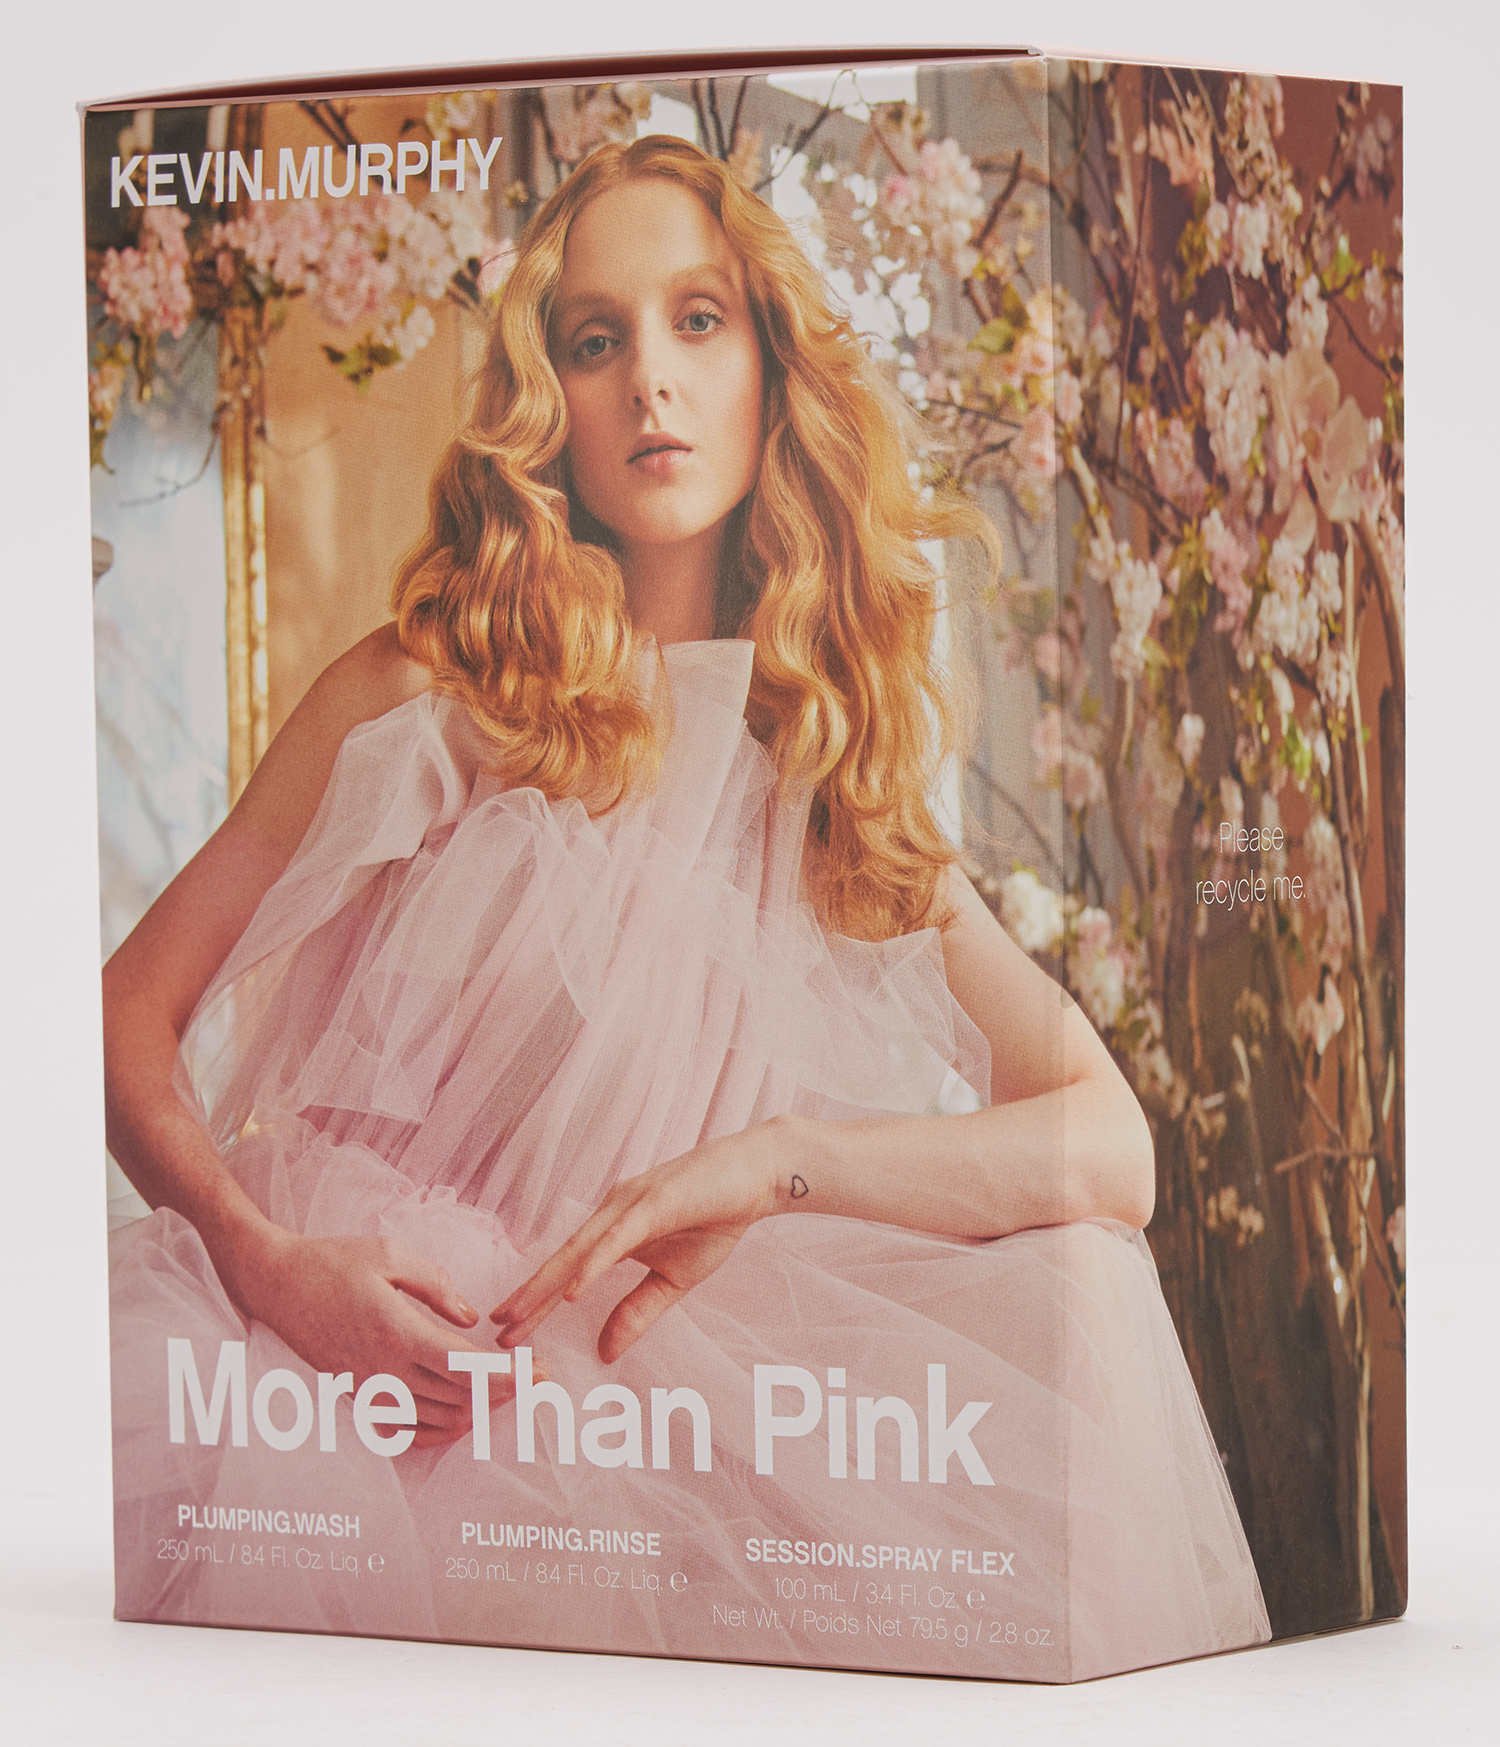 Kevin Murphy More Than Pink